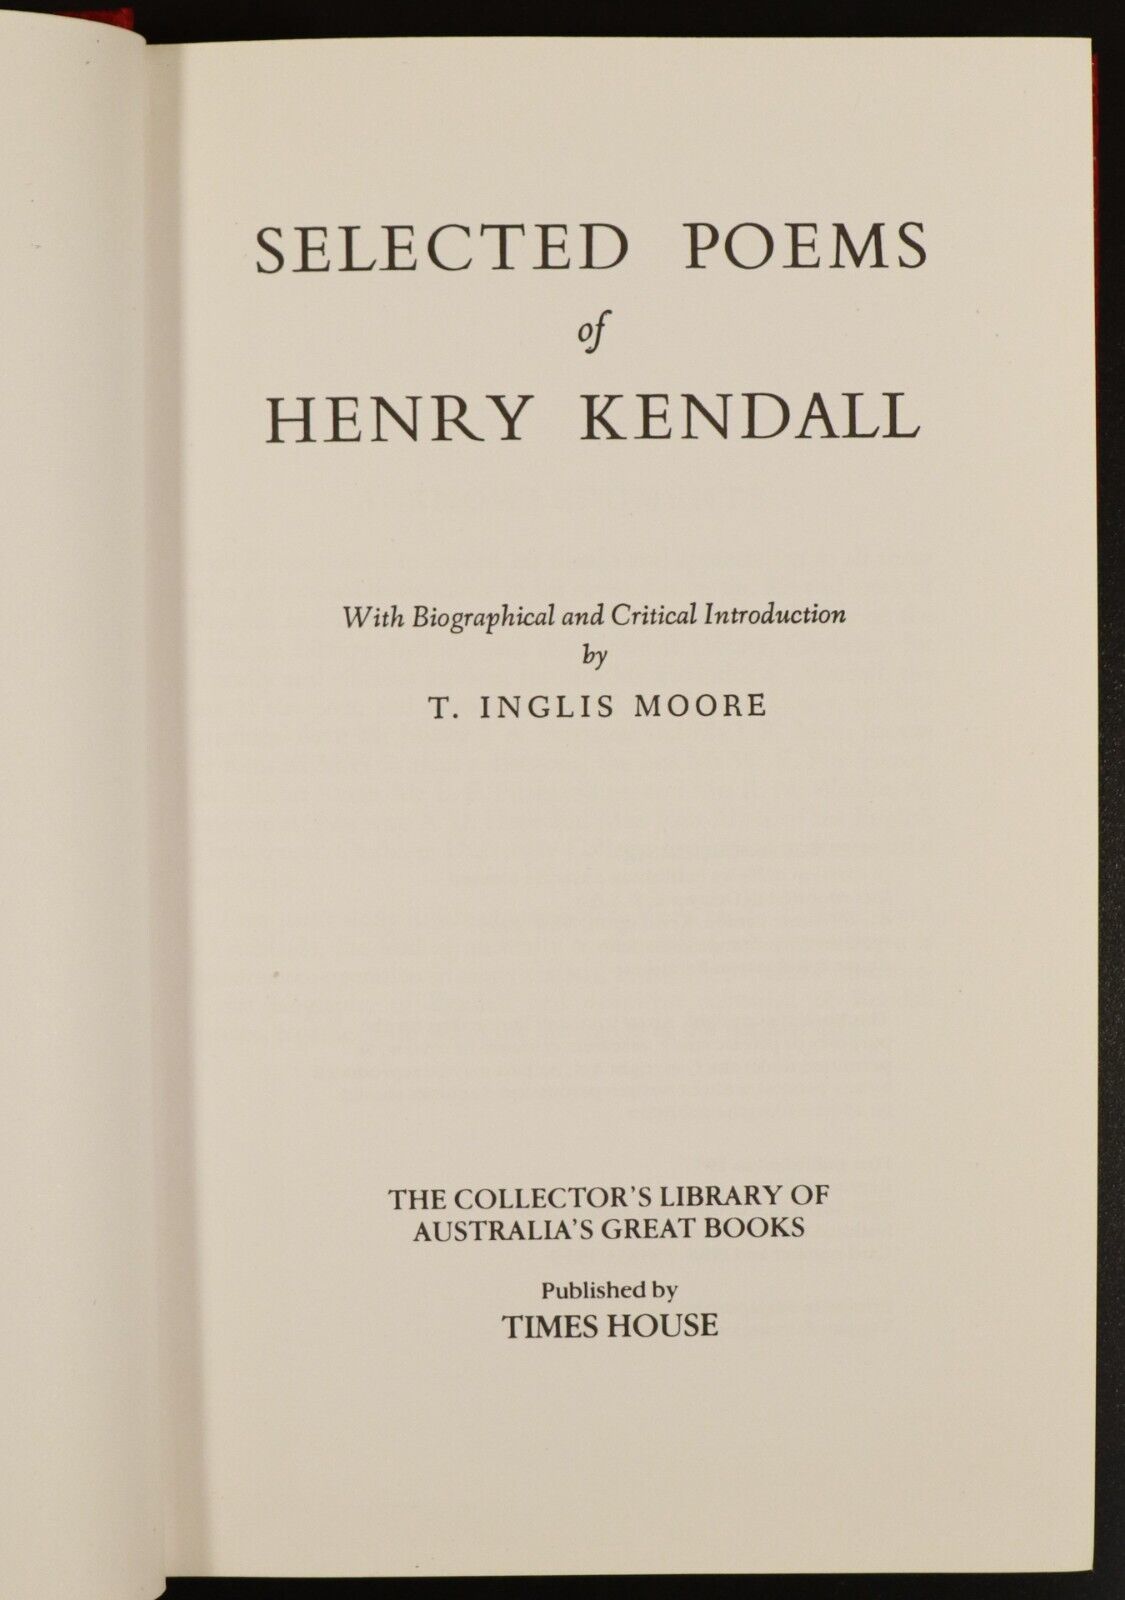 1987 Selected Poems Of Henry Kendall - Australia's Great Books Series